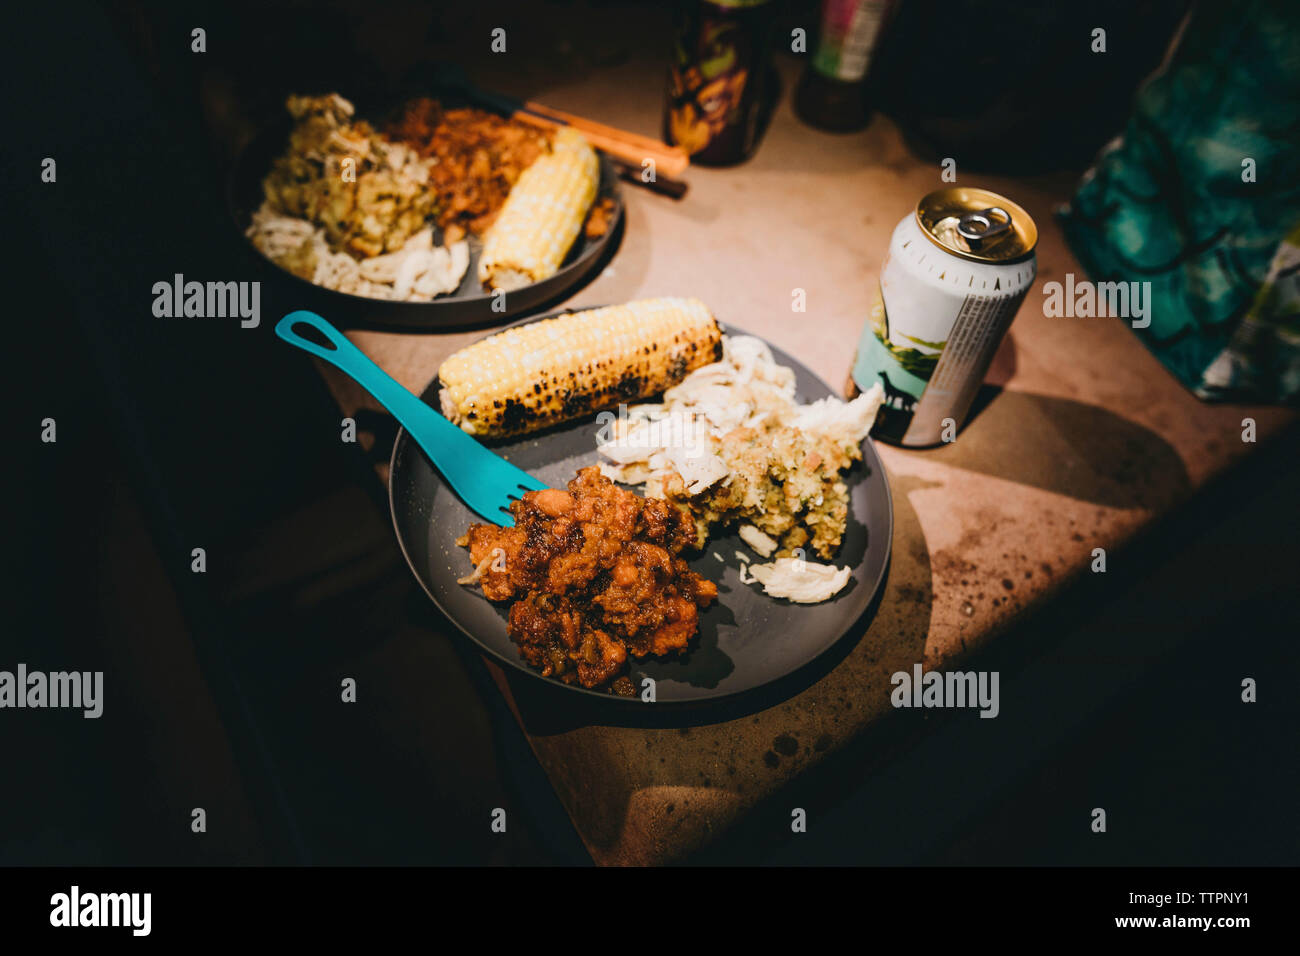 High angle view of food served in plates on table Stock Photo